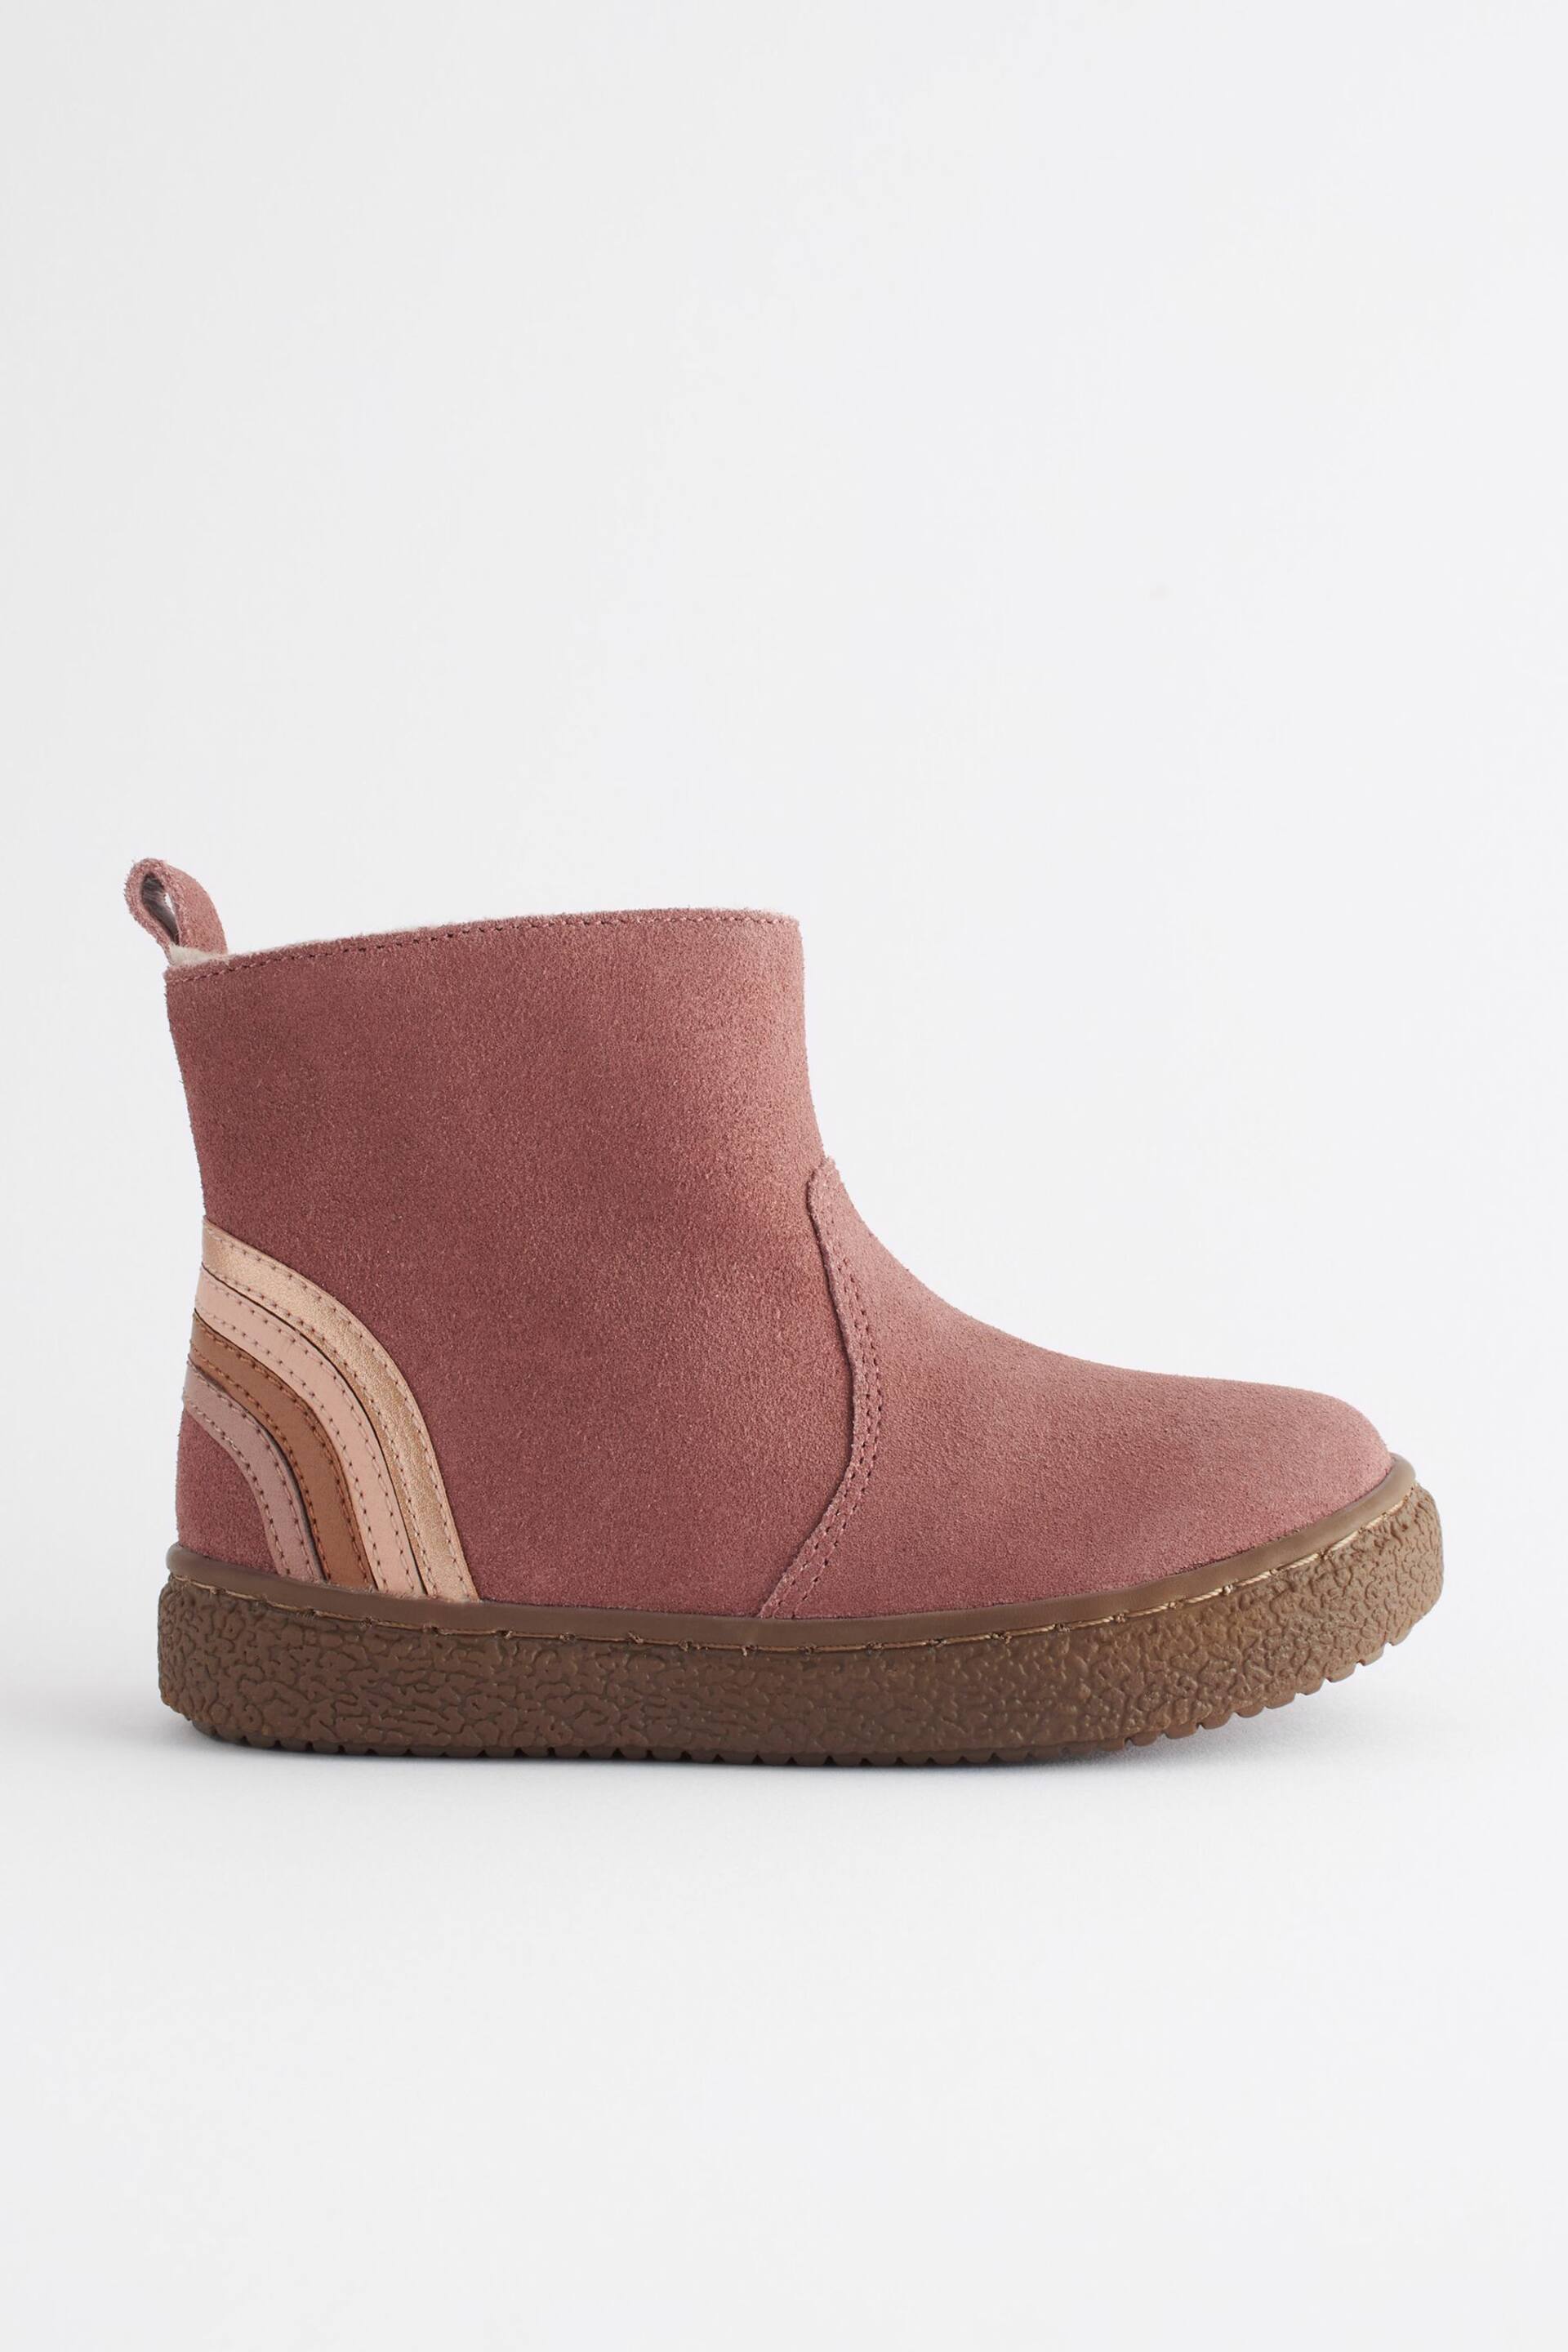 Pink Wide Fit (G) Suede Chelsea Boots - Image 2 of 5